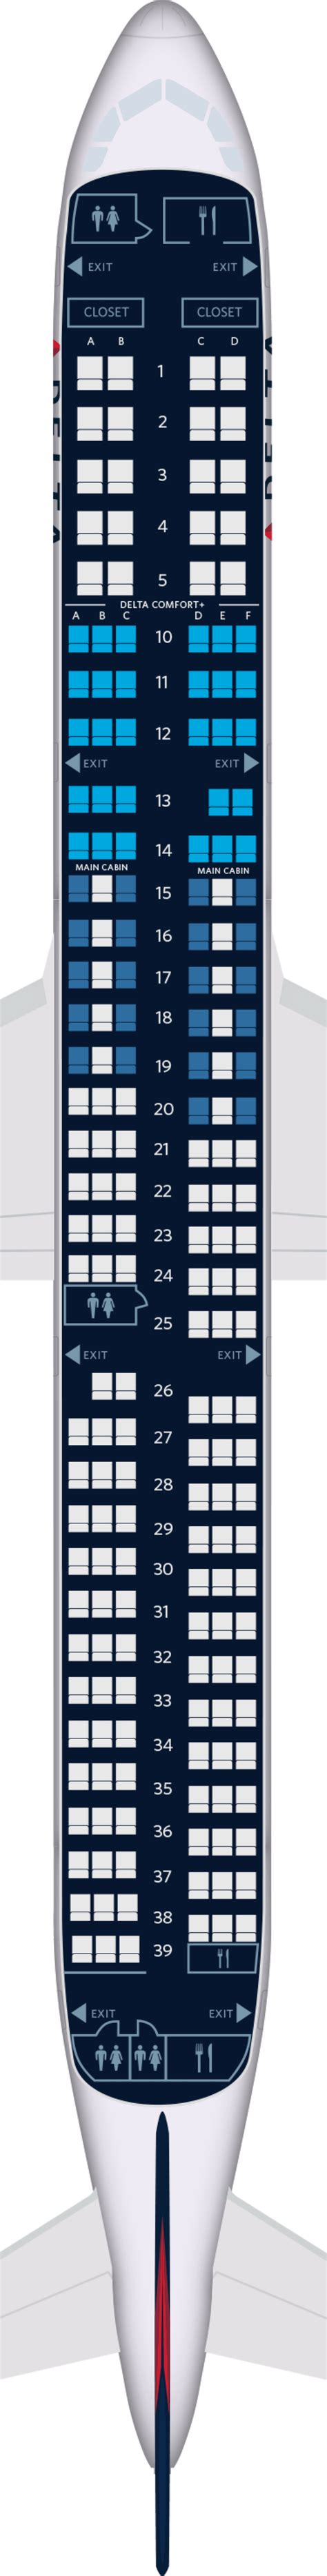 Seat map. See the approximate seat map for the Finnair Airbus A321. Seat map. A321 production dates. Check the production dates to see when each of our A321 aircraft was taken into use. The dates are listed here by the aircraft registration ID numbers. OH-LZA: 1999-01-28; OH-LZB: 1999-03-04; OH-LZC: 2000-03-08; OH-LZD: 2000-06-09; OH-LZE: …. 